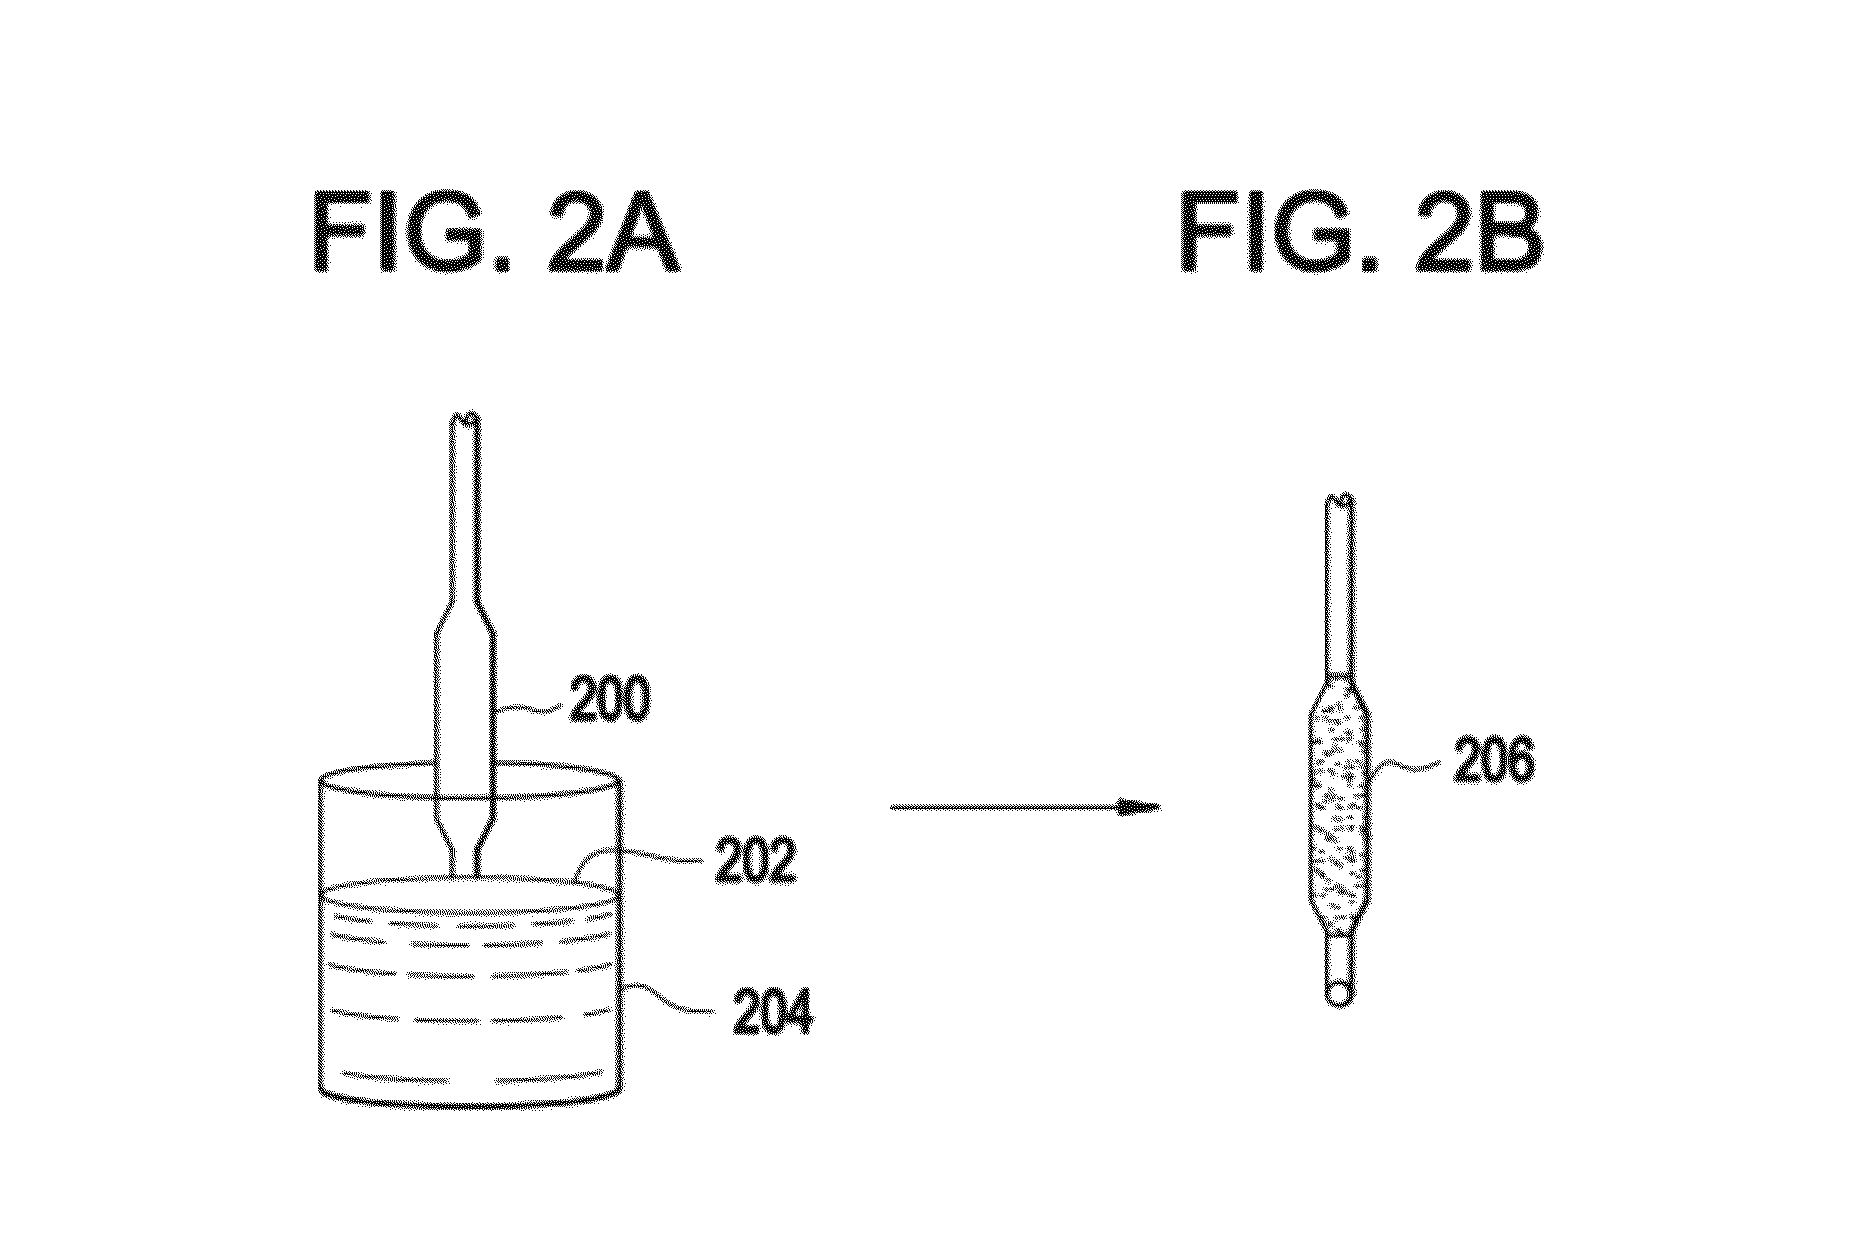 Expandable devices coated with a paclitaxel composition